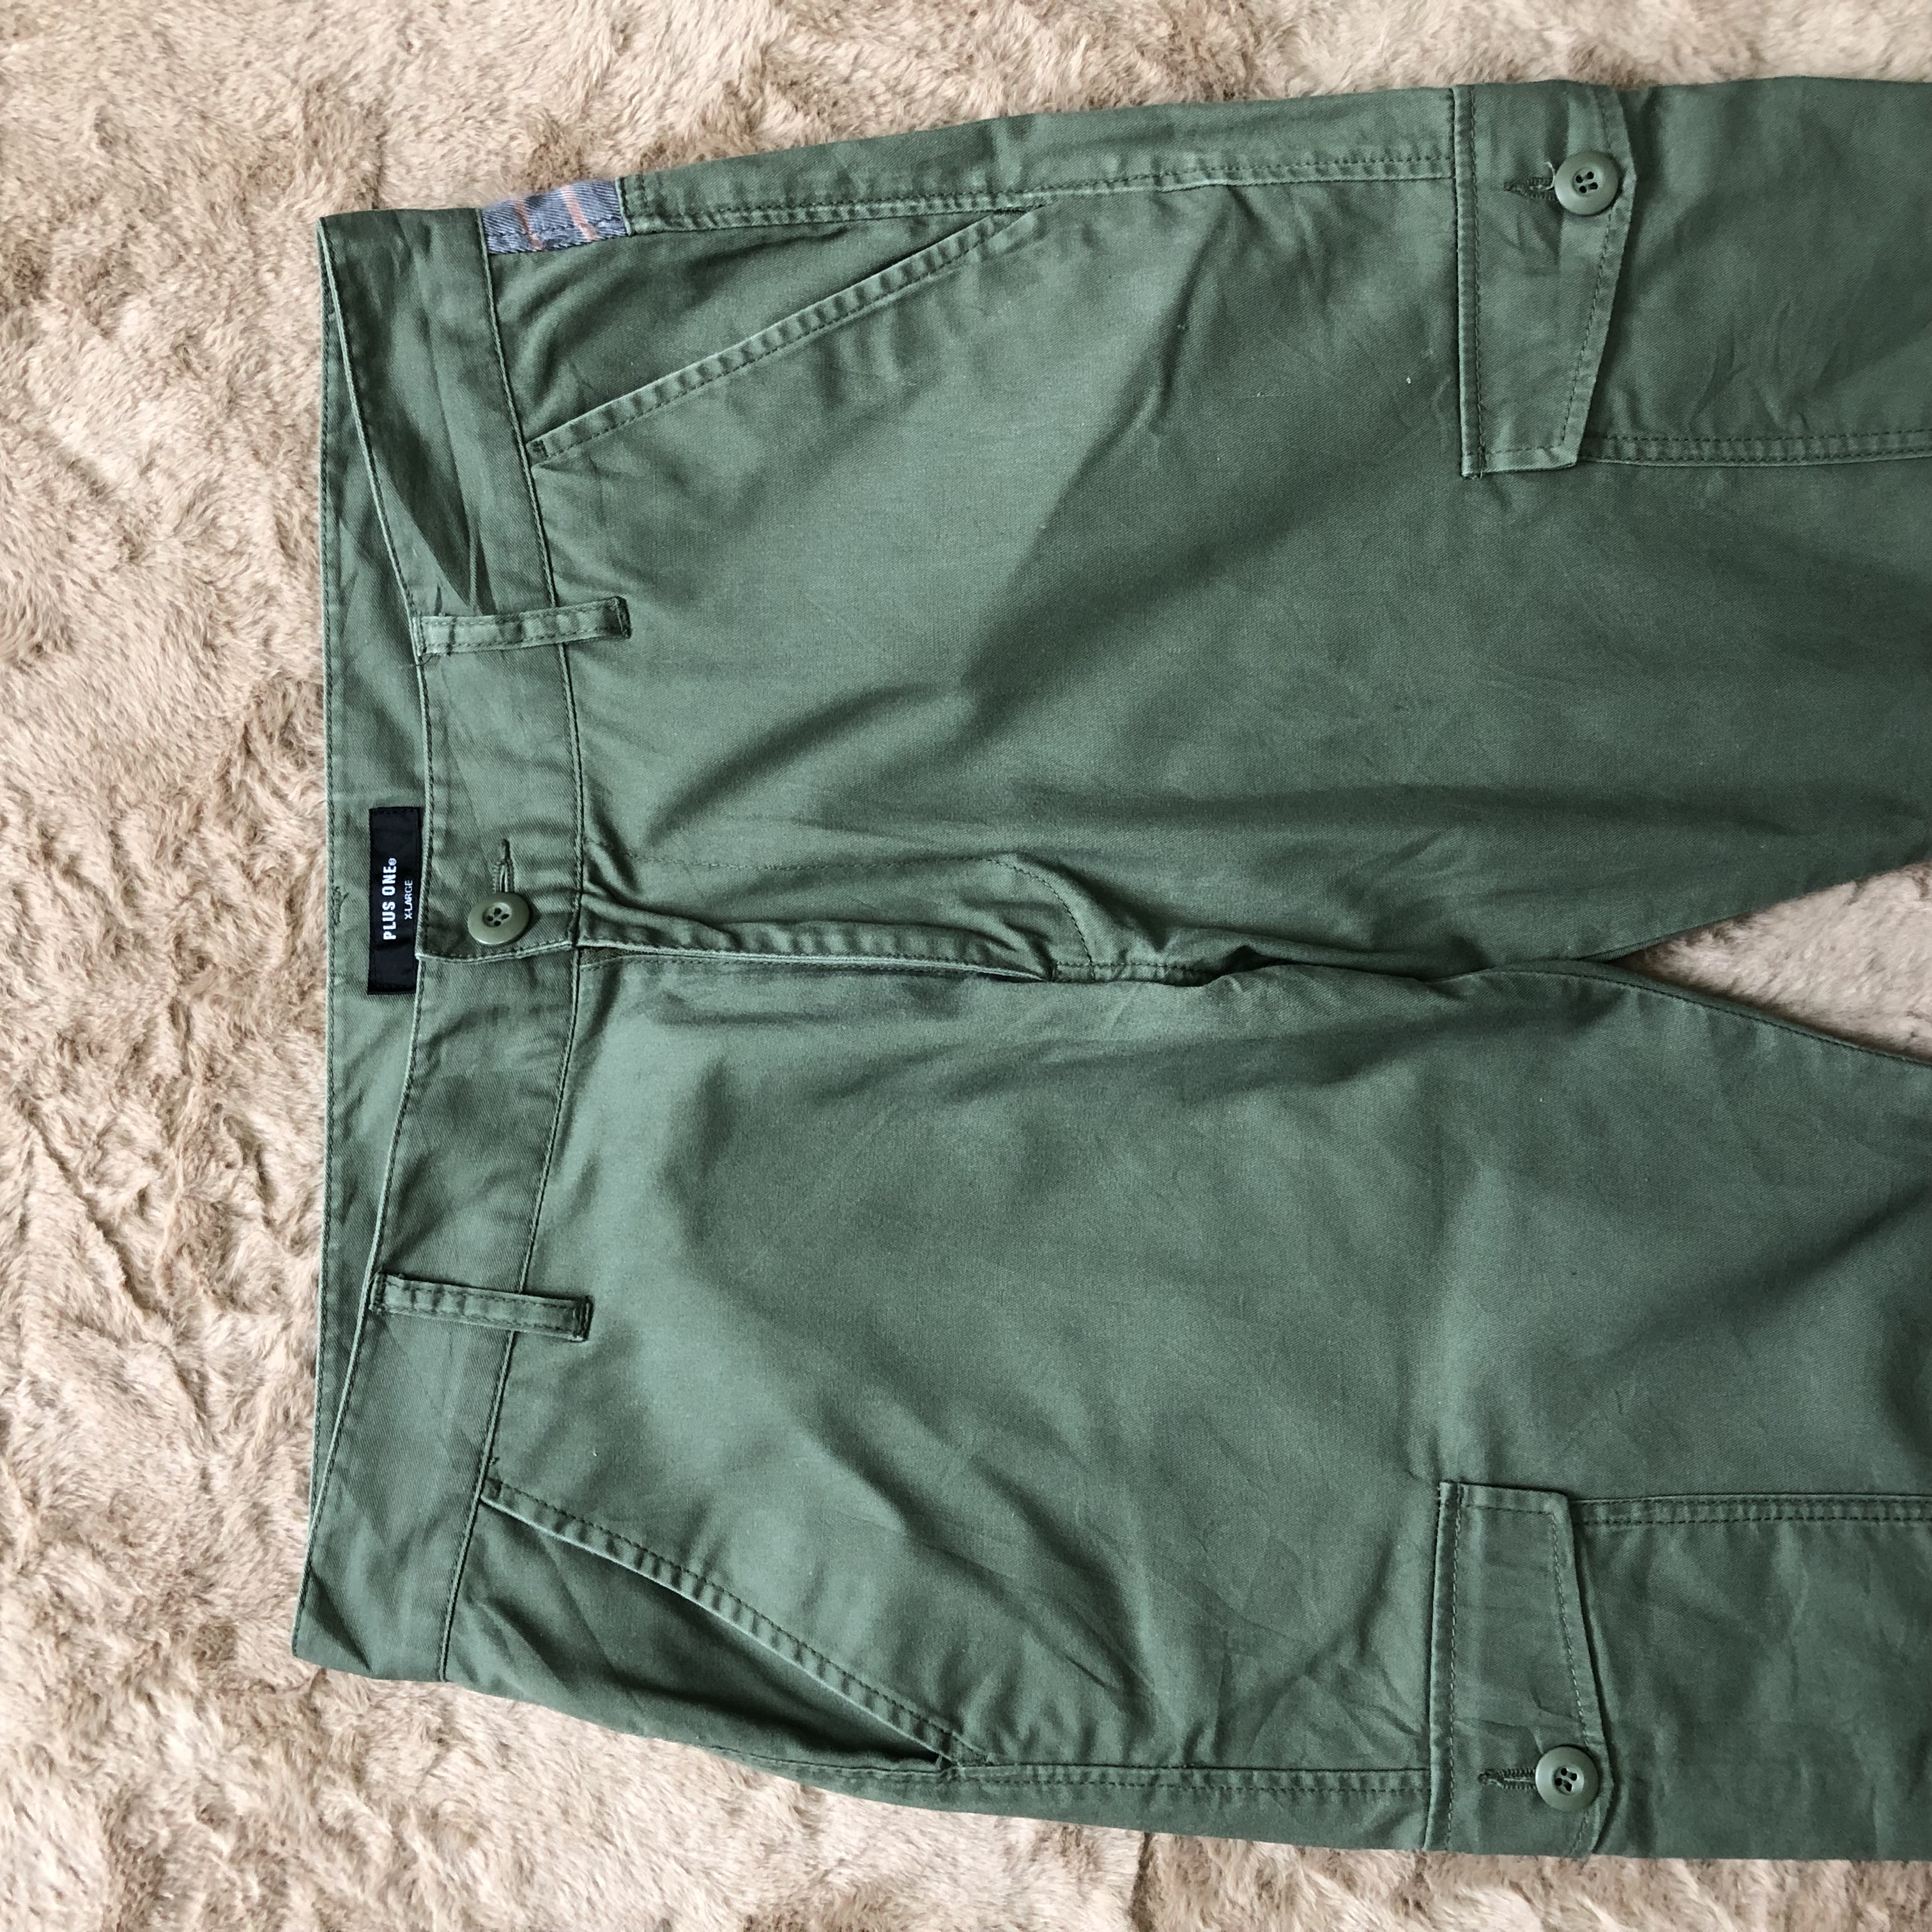 Japanese Brand - Plus One Military Army Style Cargo Pants 6 Pocket #4289-149 - 2